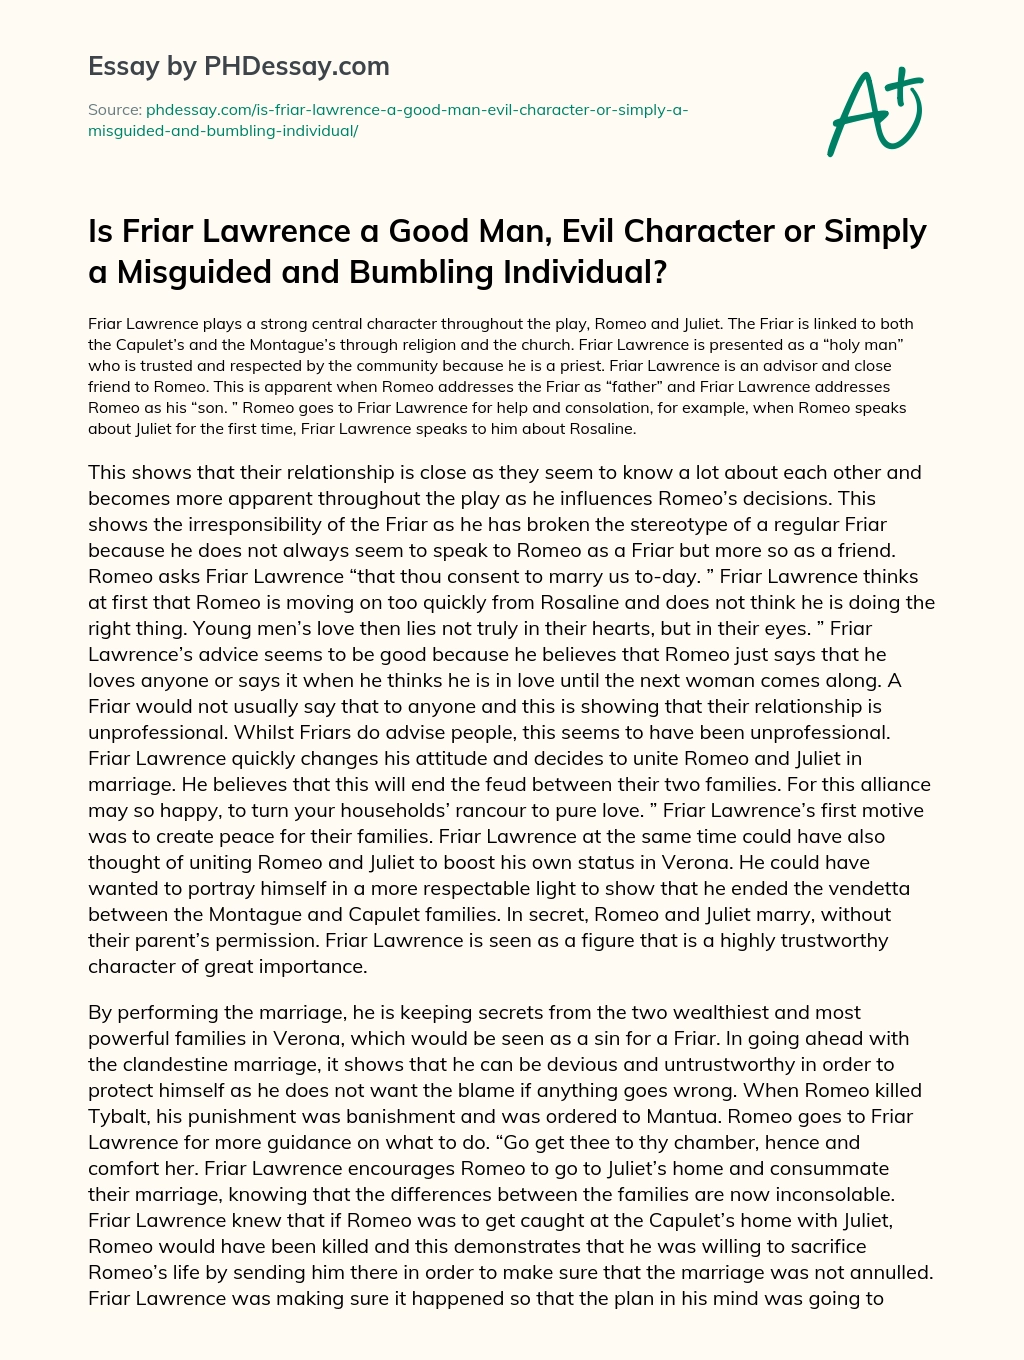 Is Friar Lawrence a Good Man, Evil Character or Simply a Misguided and Bumbling Individual? essay